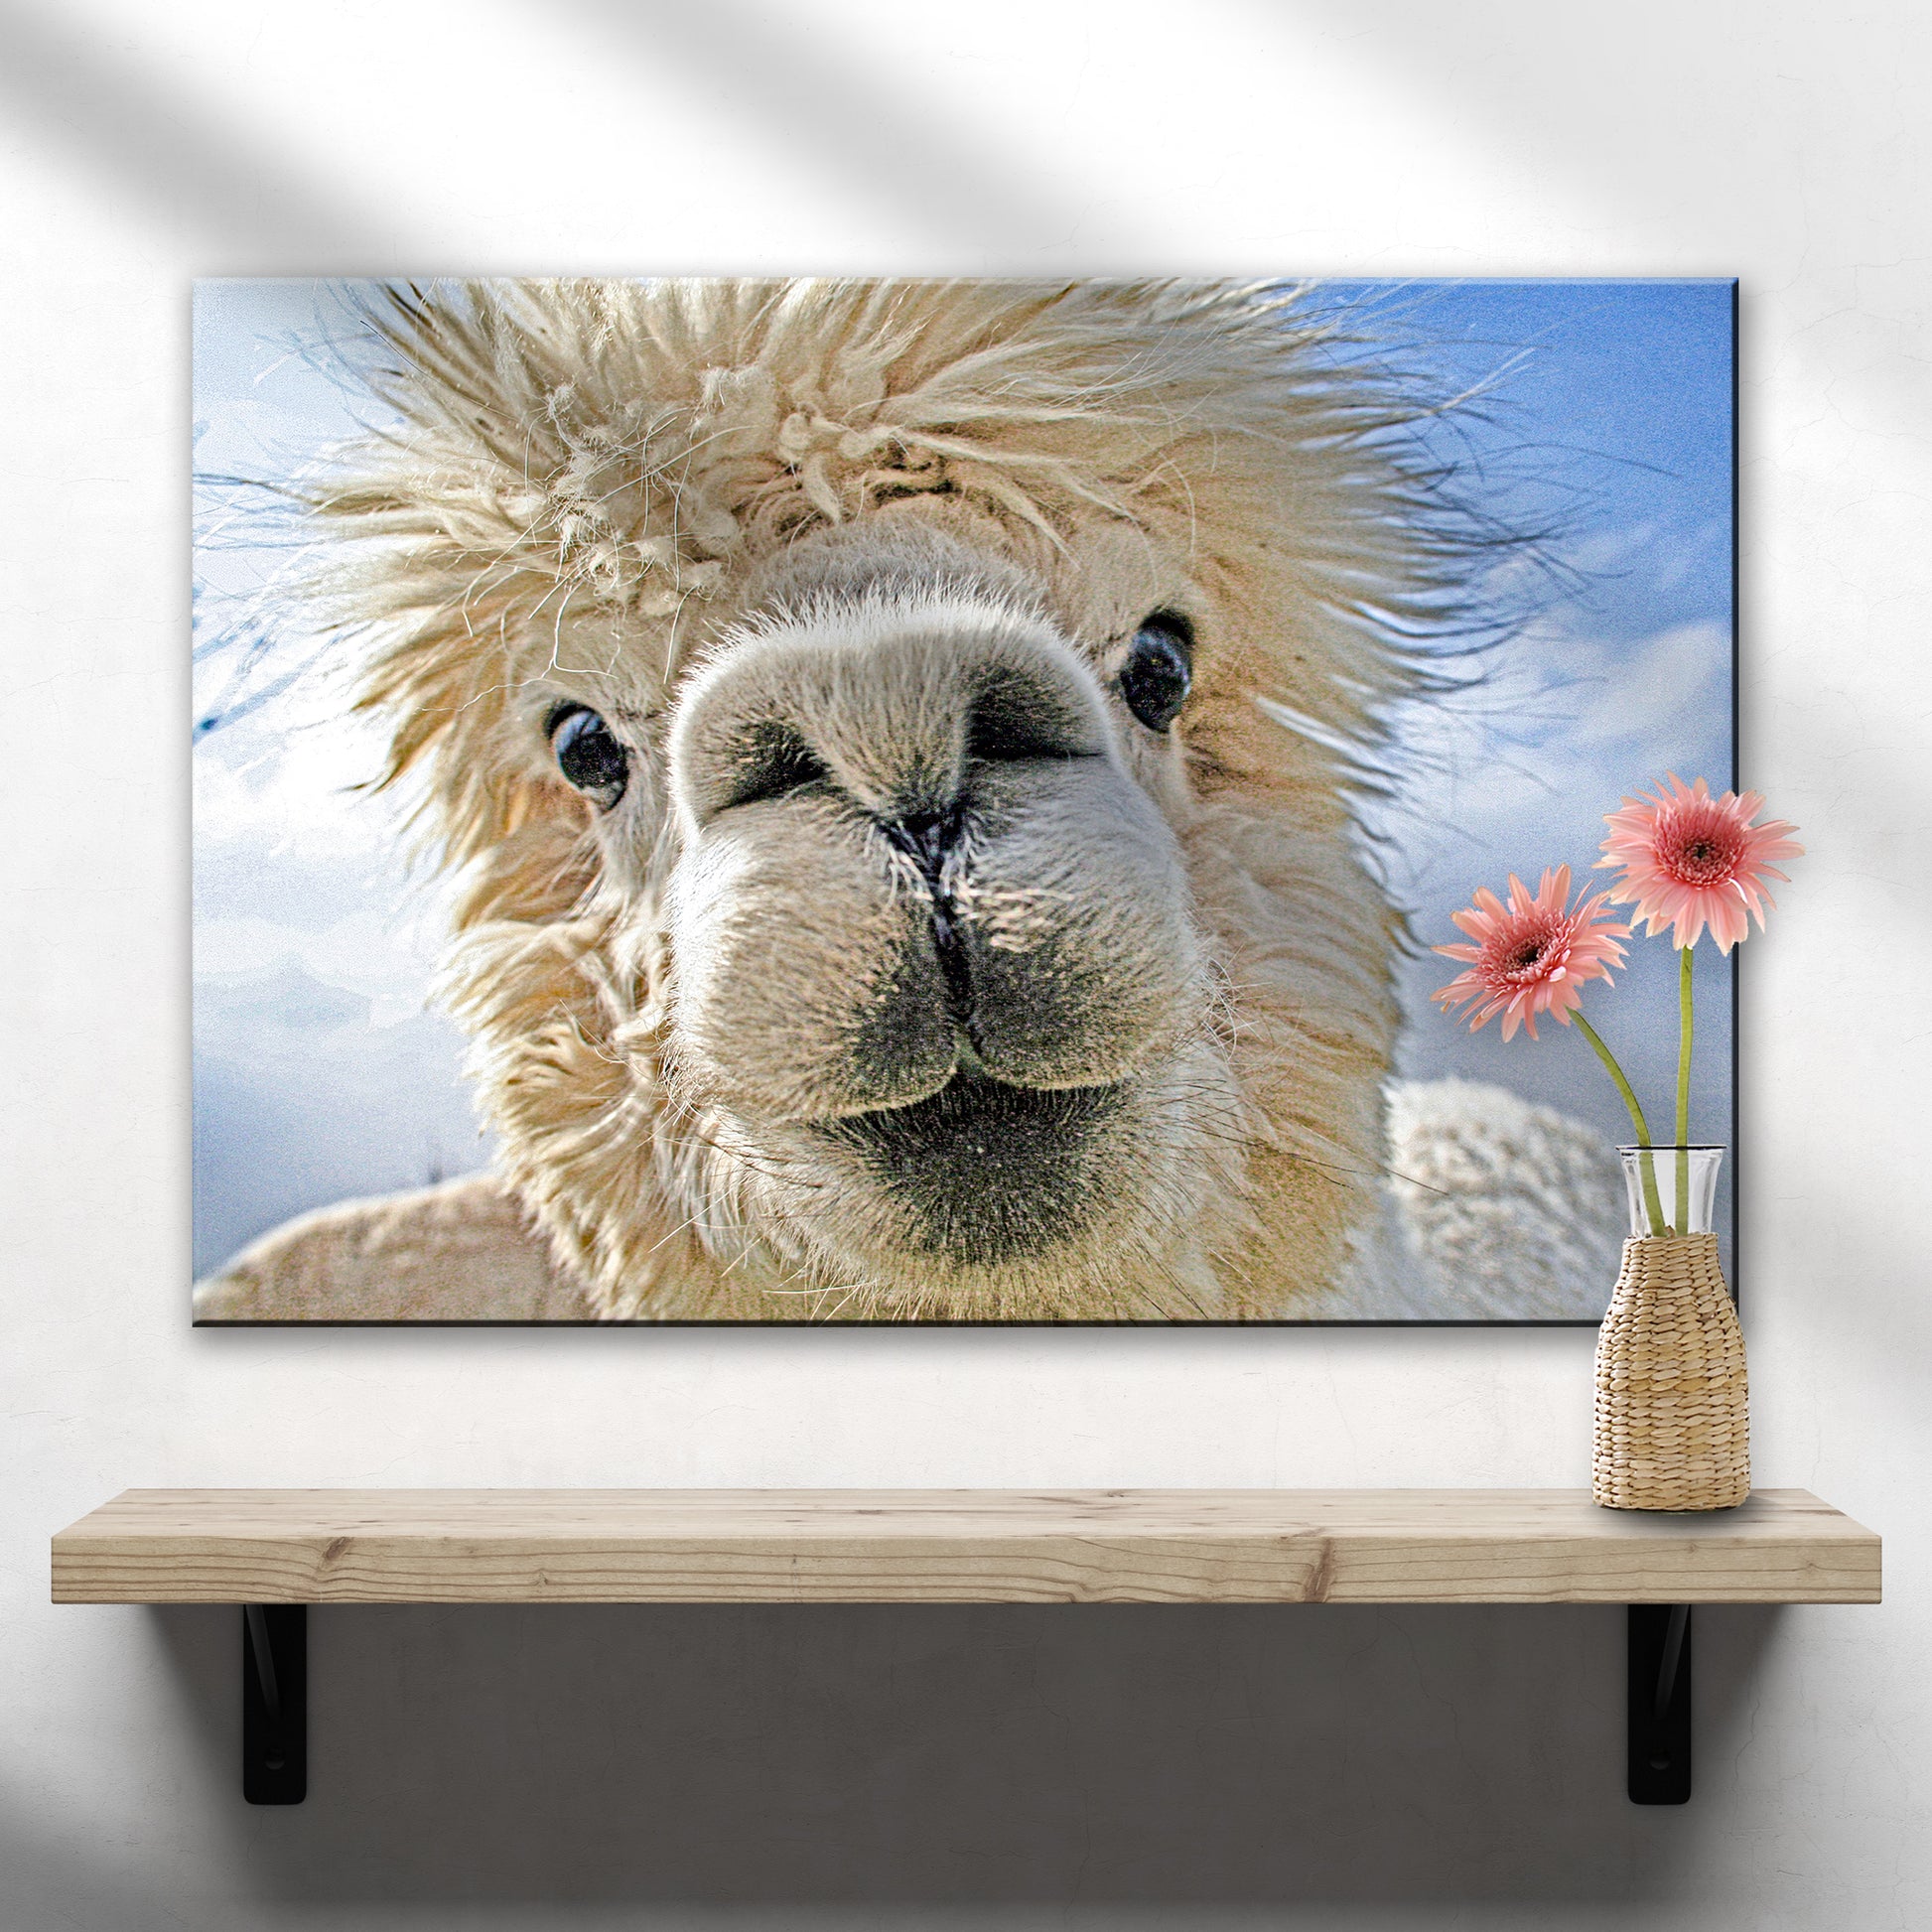 Funny Llama Selfie Canvas Wall Art - Image by Tailored Canvases